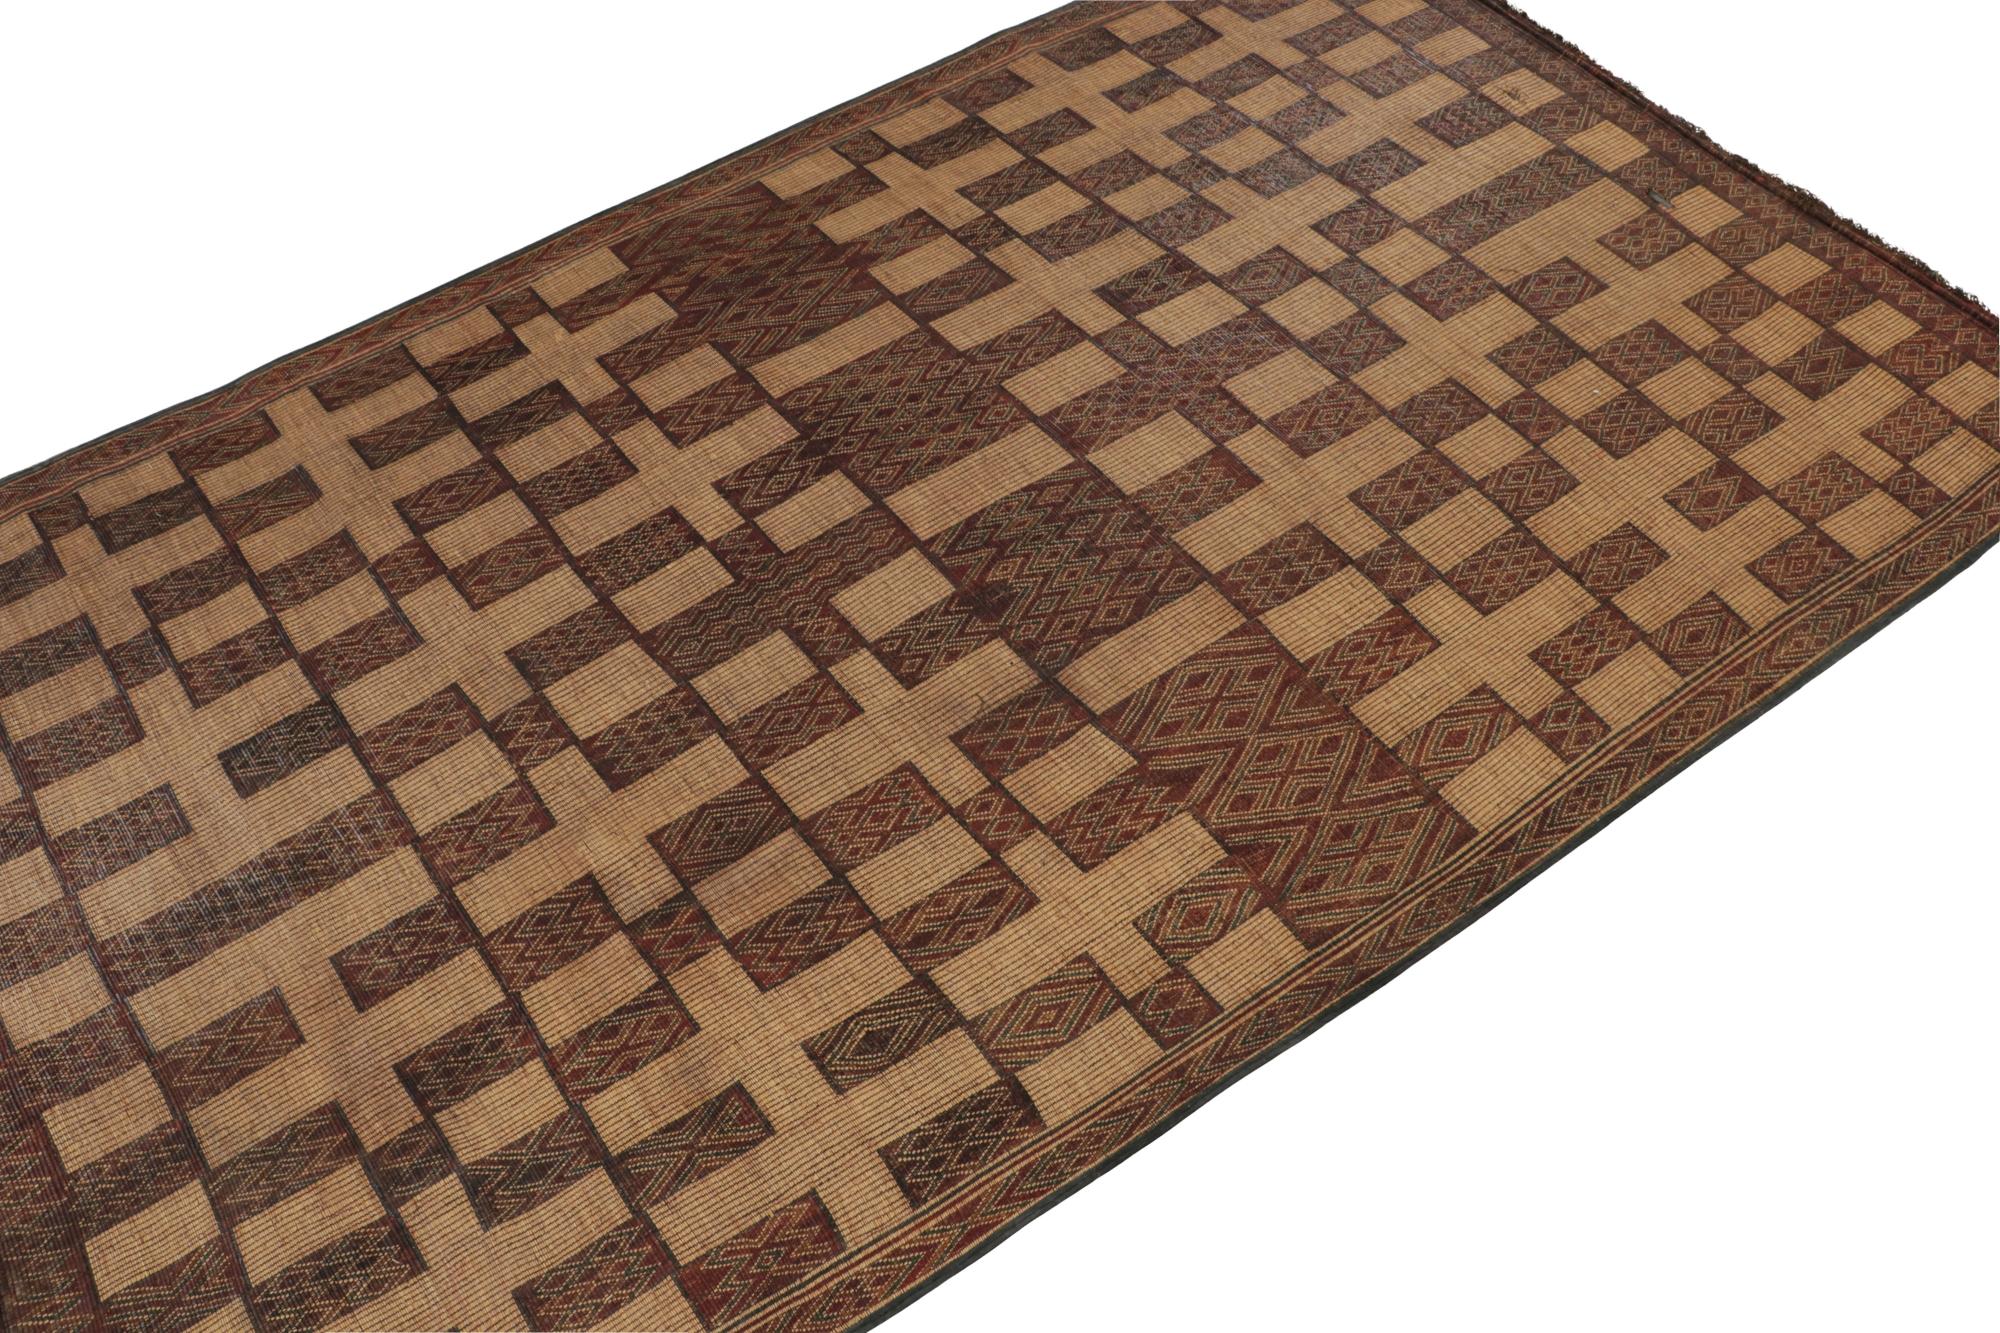 Hand-Knotted Vintage Moroccan Tuareg Mat in Beige & Red Geometric Patterns, from Rug & Kilim